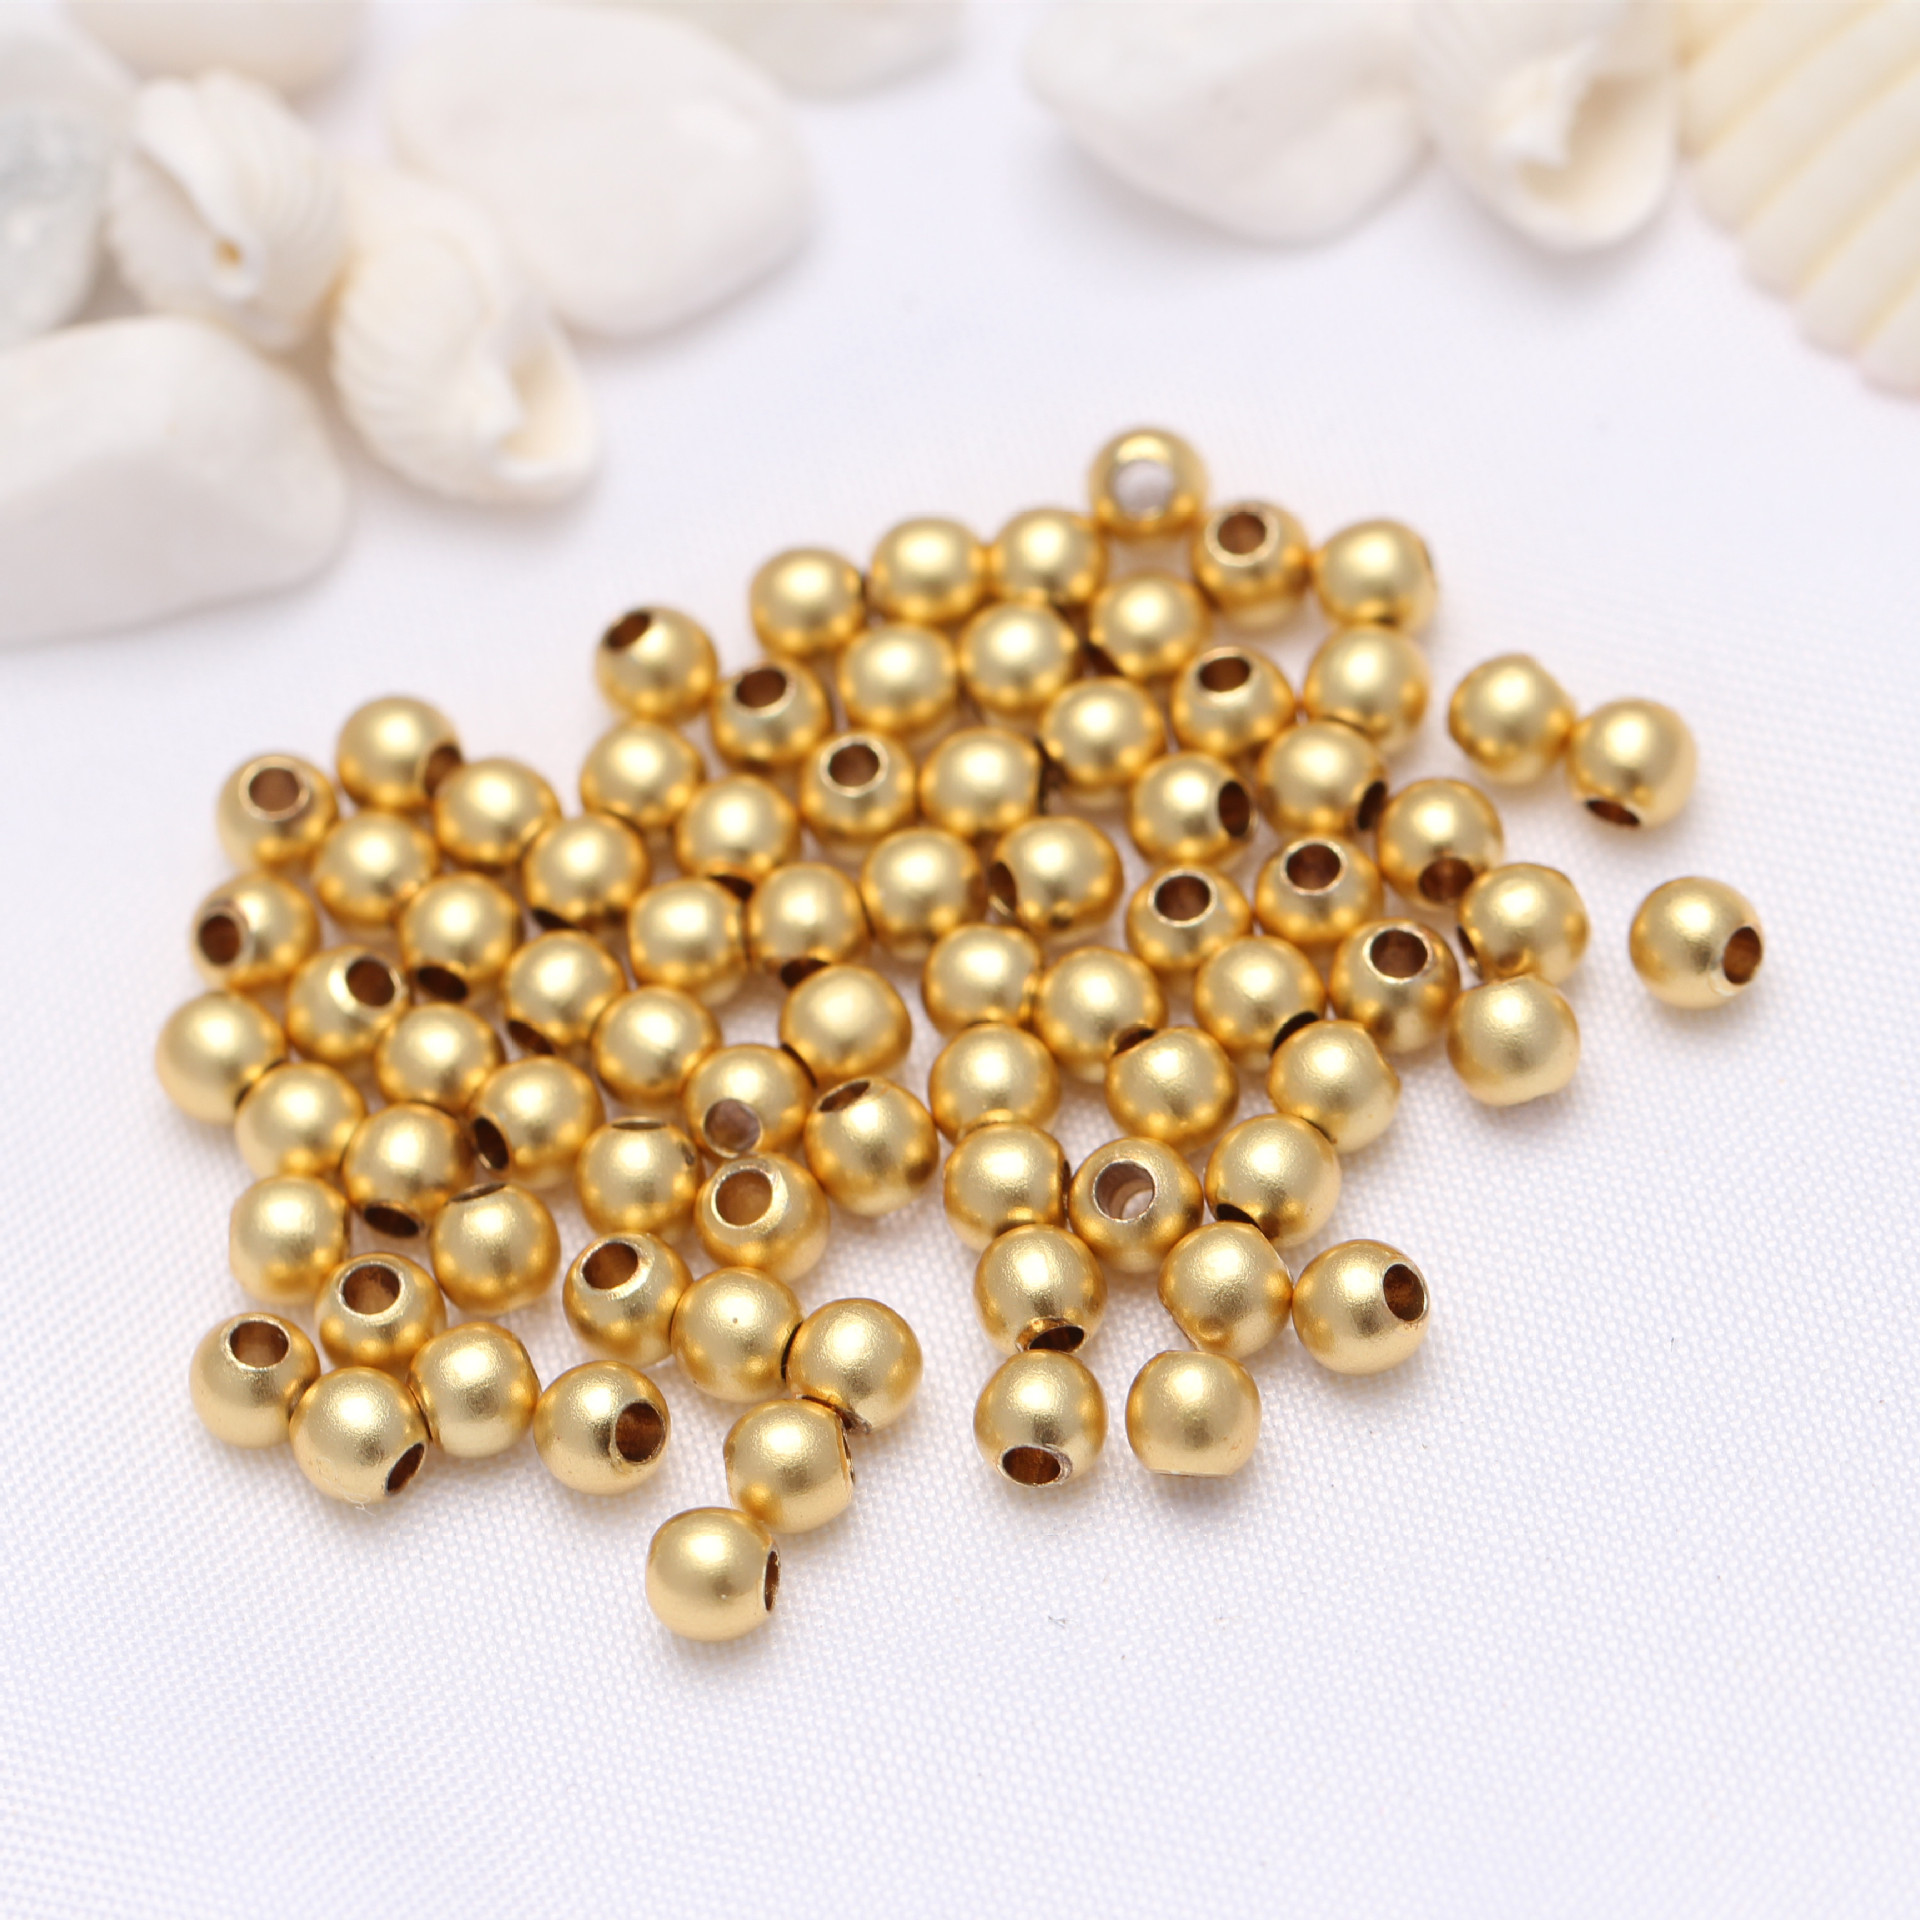 A-82 Color Preserving Sand Gold Loose Bead 2.5mm